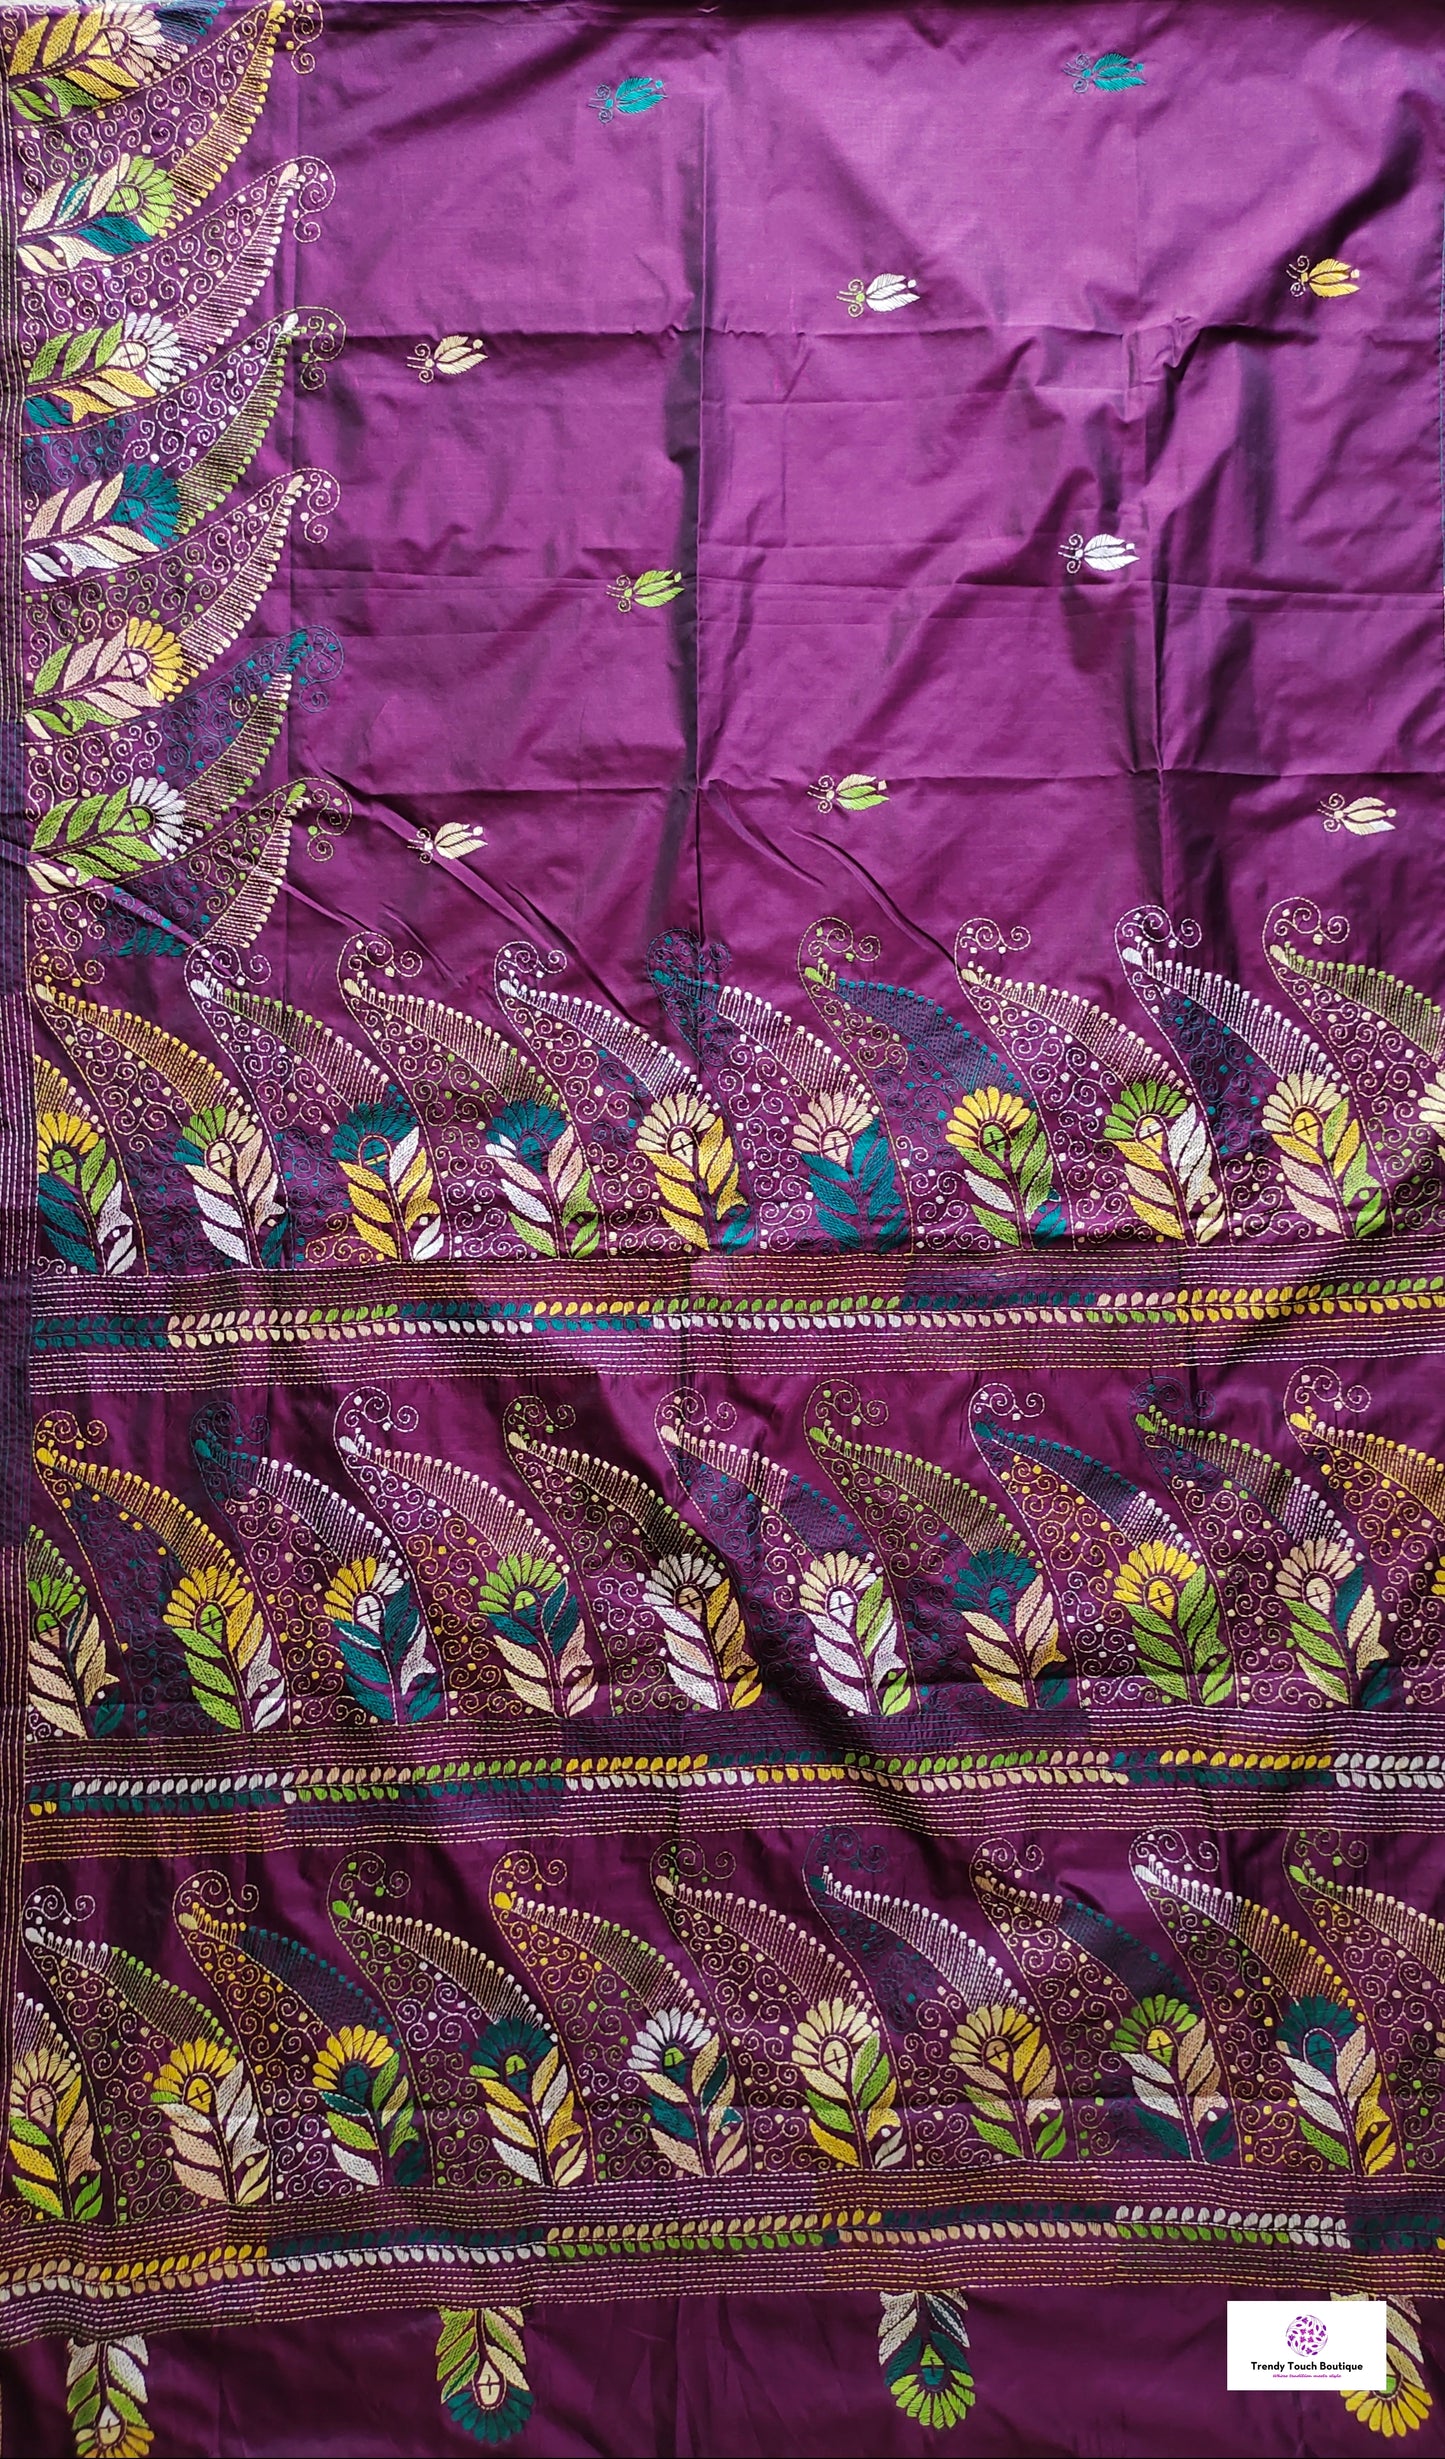 Magenta color designer handembroidered bangalore art silk saree with kantha handembroidery in white, green, yellow threads perfect for summer weddings and casual functions with blouse piece best summer fabric